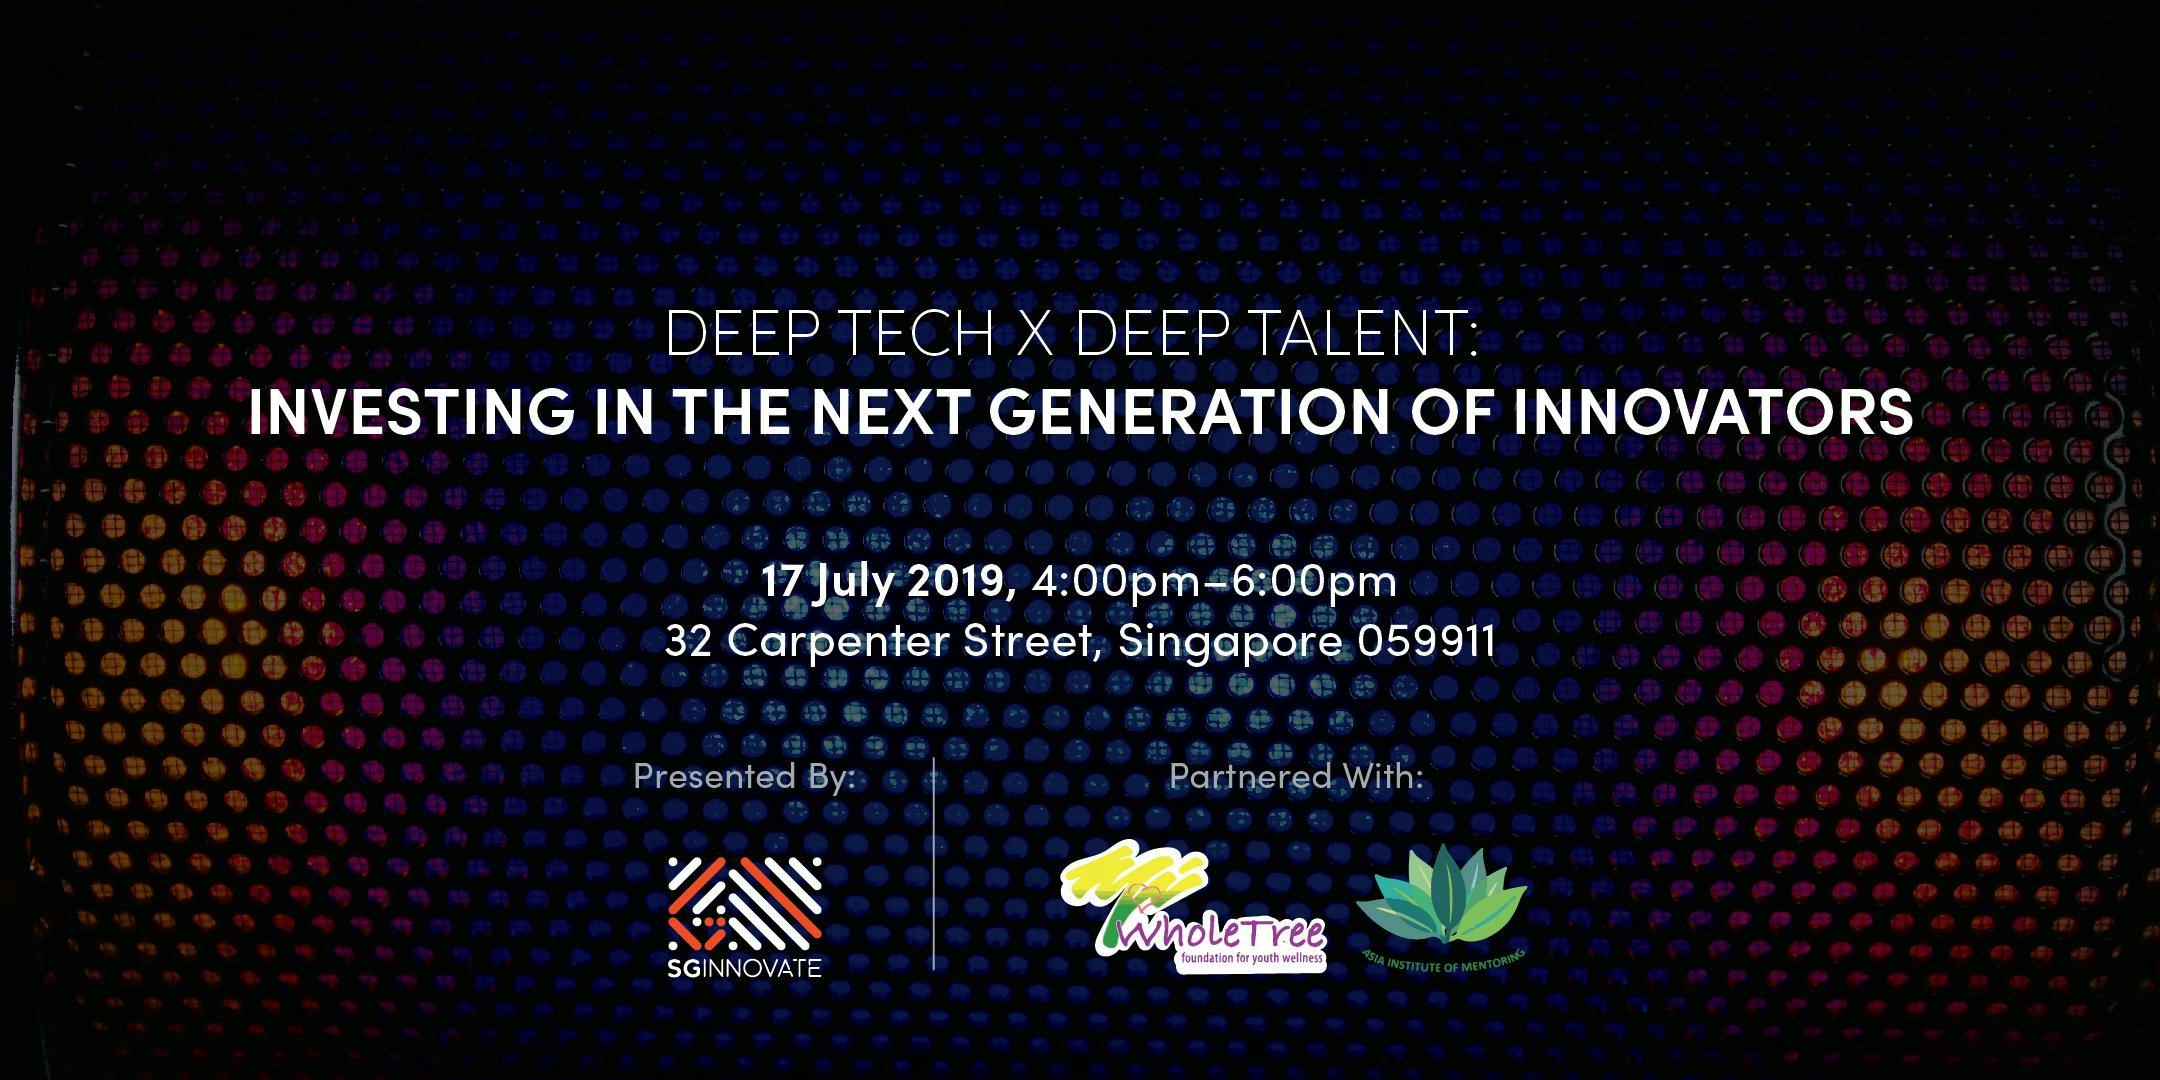 Deep Tech x Deep Talent: Investing in the Next Generation of Innovators